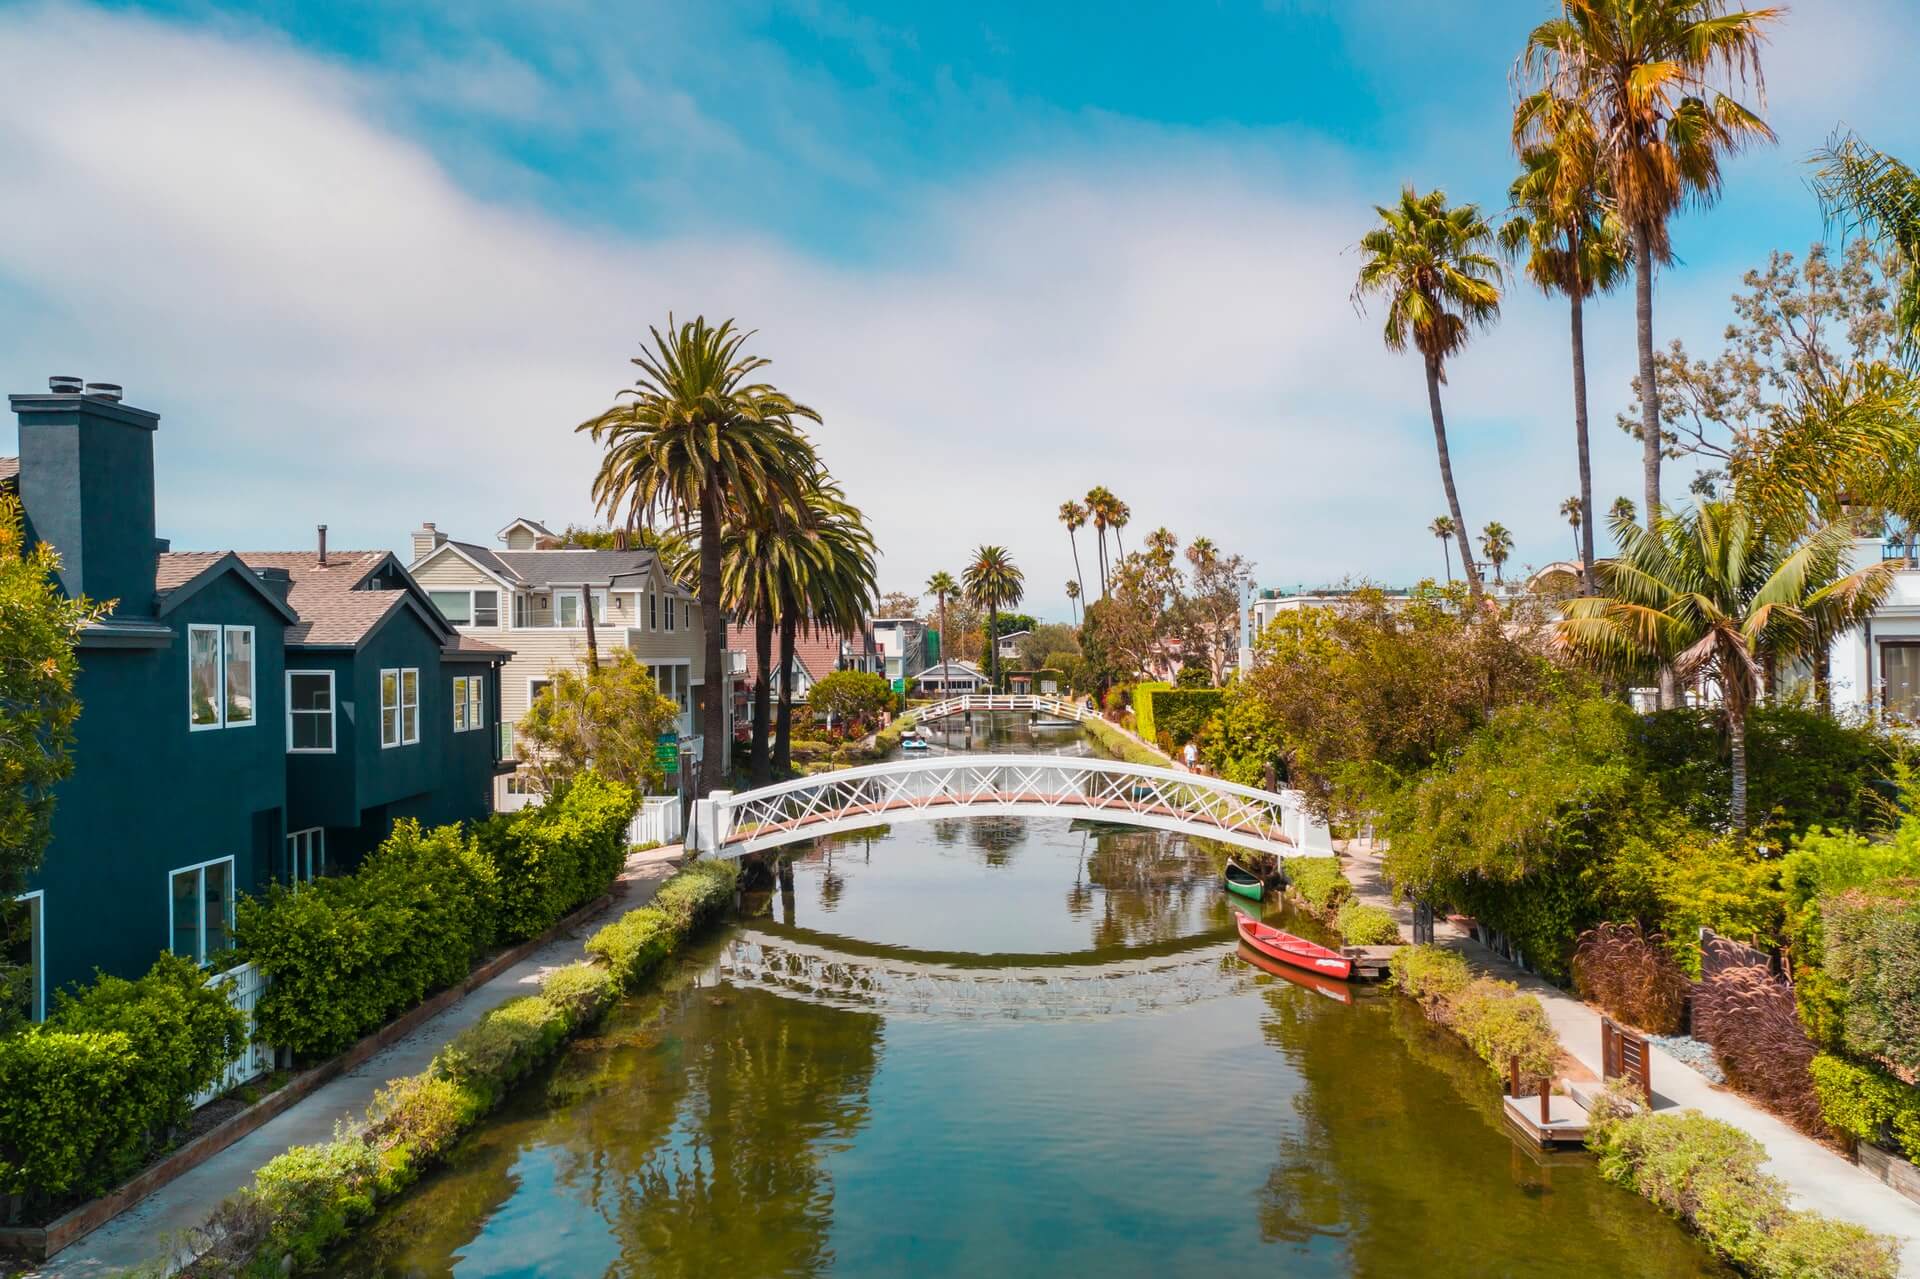 Venice Beach Canals, Los Angeles, United States